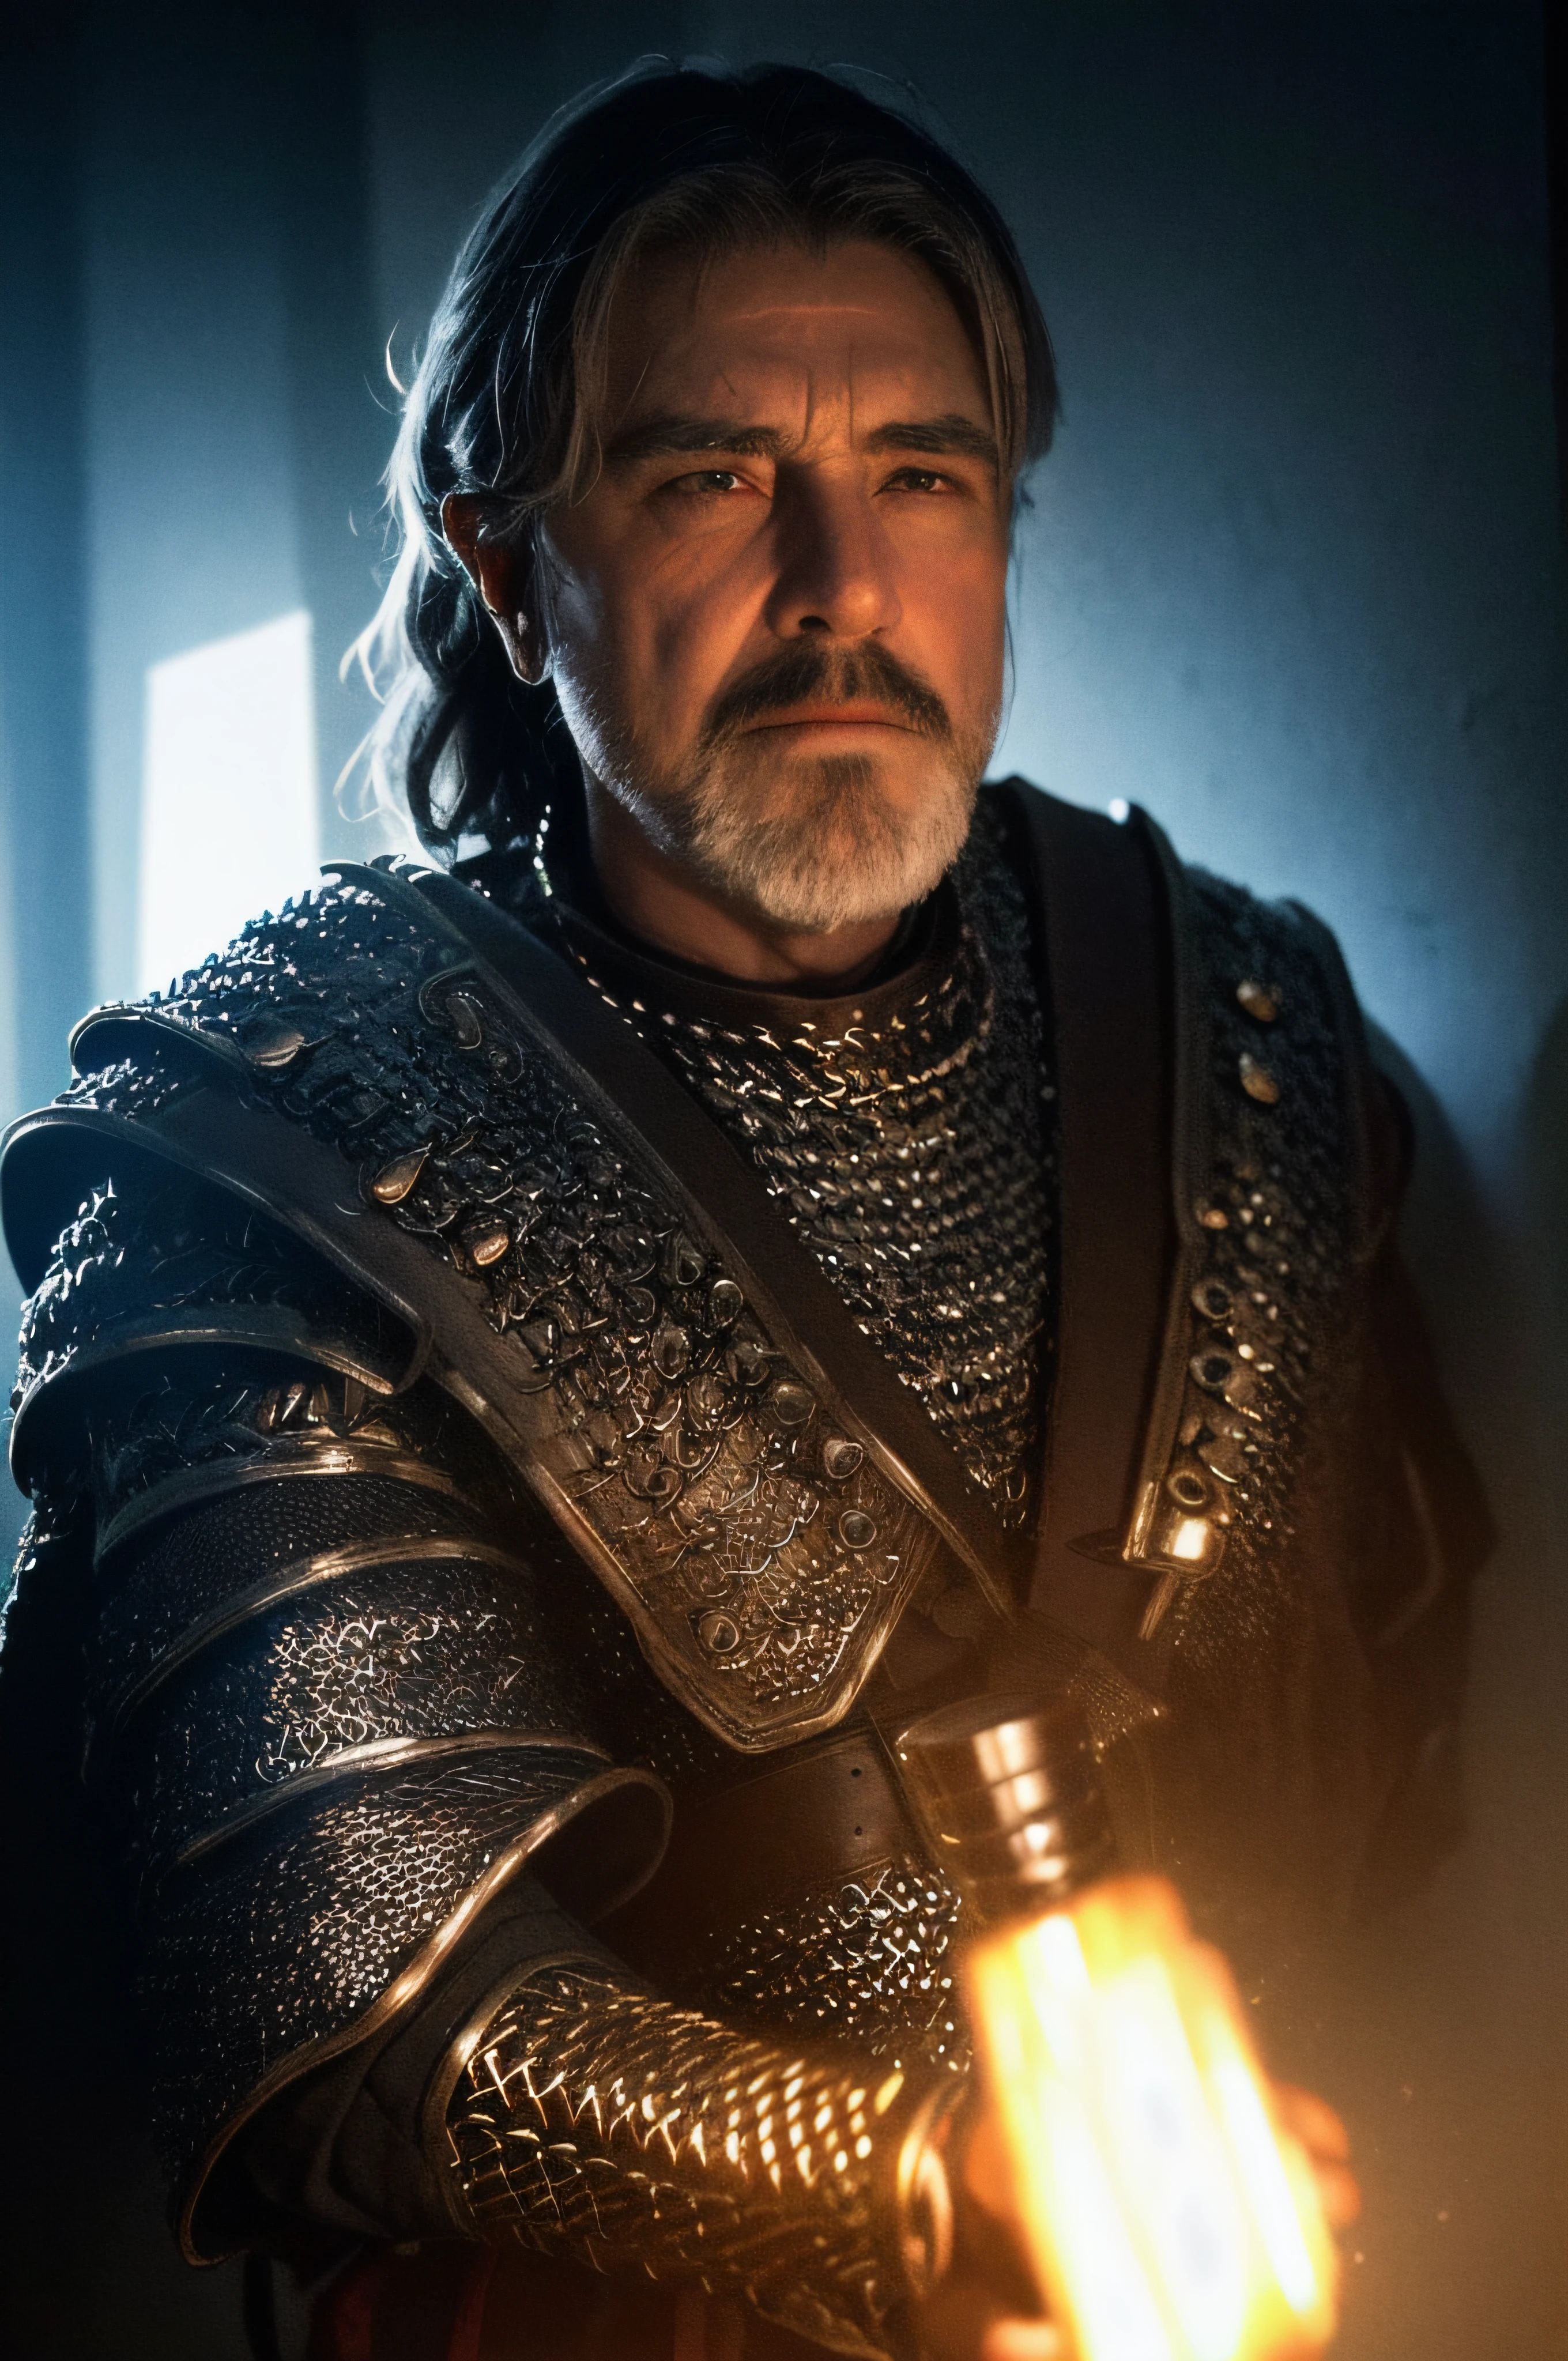 Raw, cinematic shot, (sharp focus:1.5), (photorealistic:1.2), 1boy, medium portrait of (a weary-looking but still proud and fierce-looking old Viking warrior, now the leader of his village, dressed in elaborately detailed chain mail and leather armour, a few torches burn on the walls, giving the scene a dark atmosphere but sculpting the forms in sharp chiaroscuro), it is night time, dark lighting, twilight lighting, volumetric lighting,